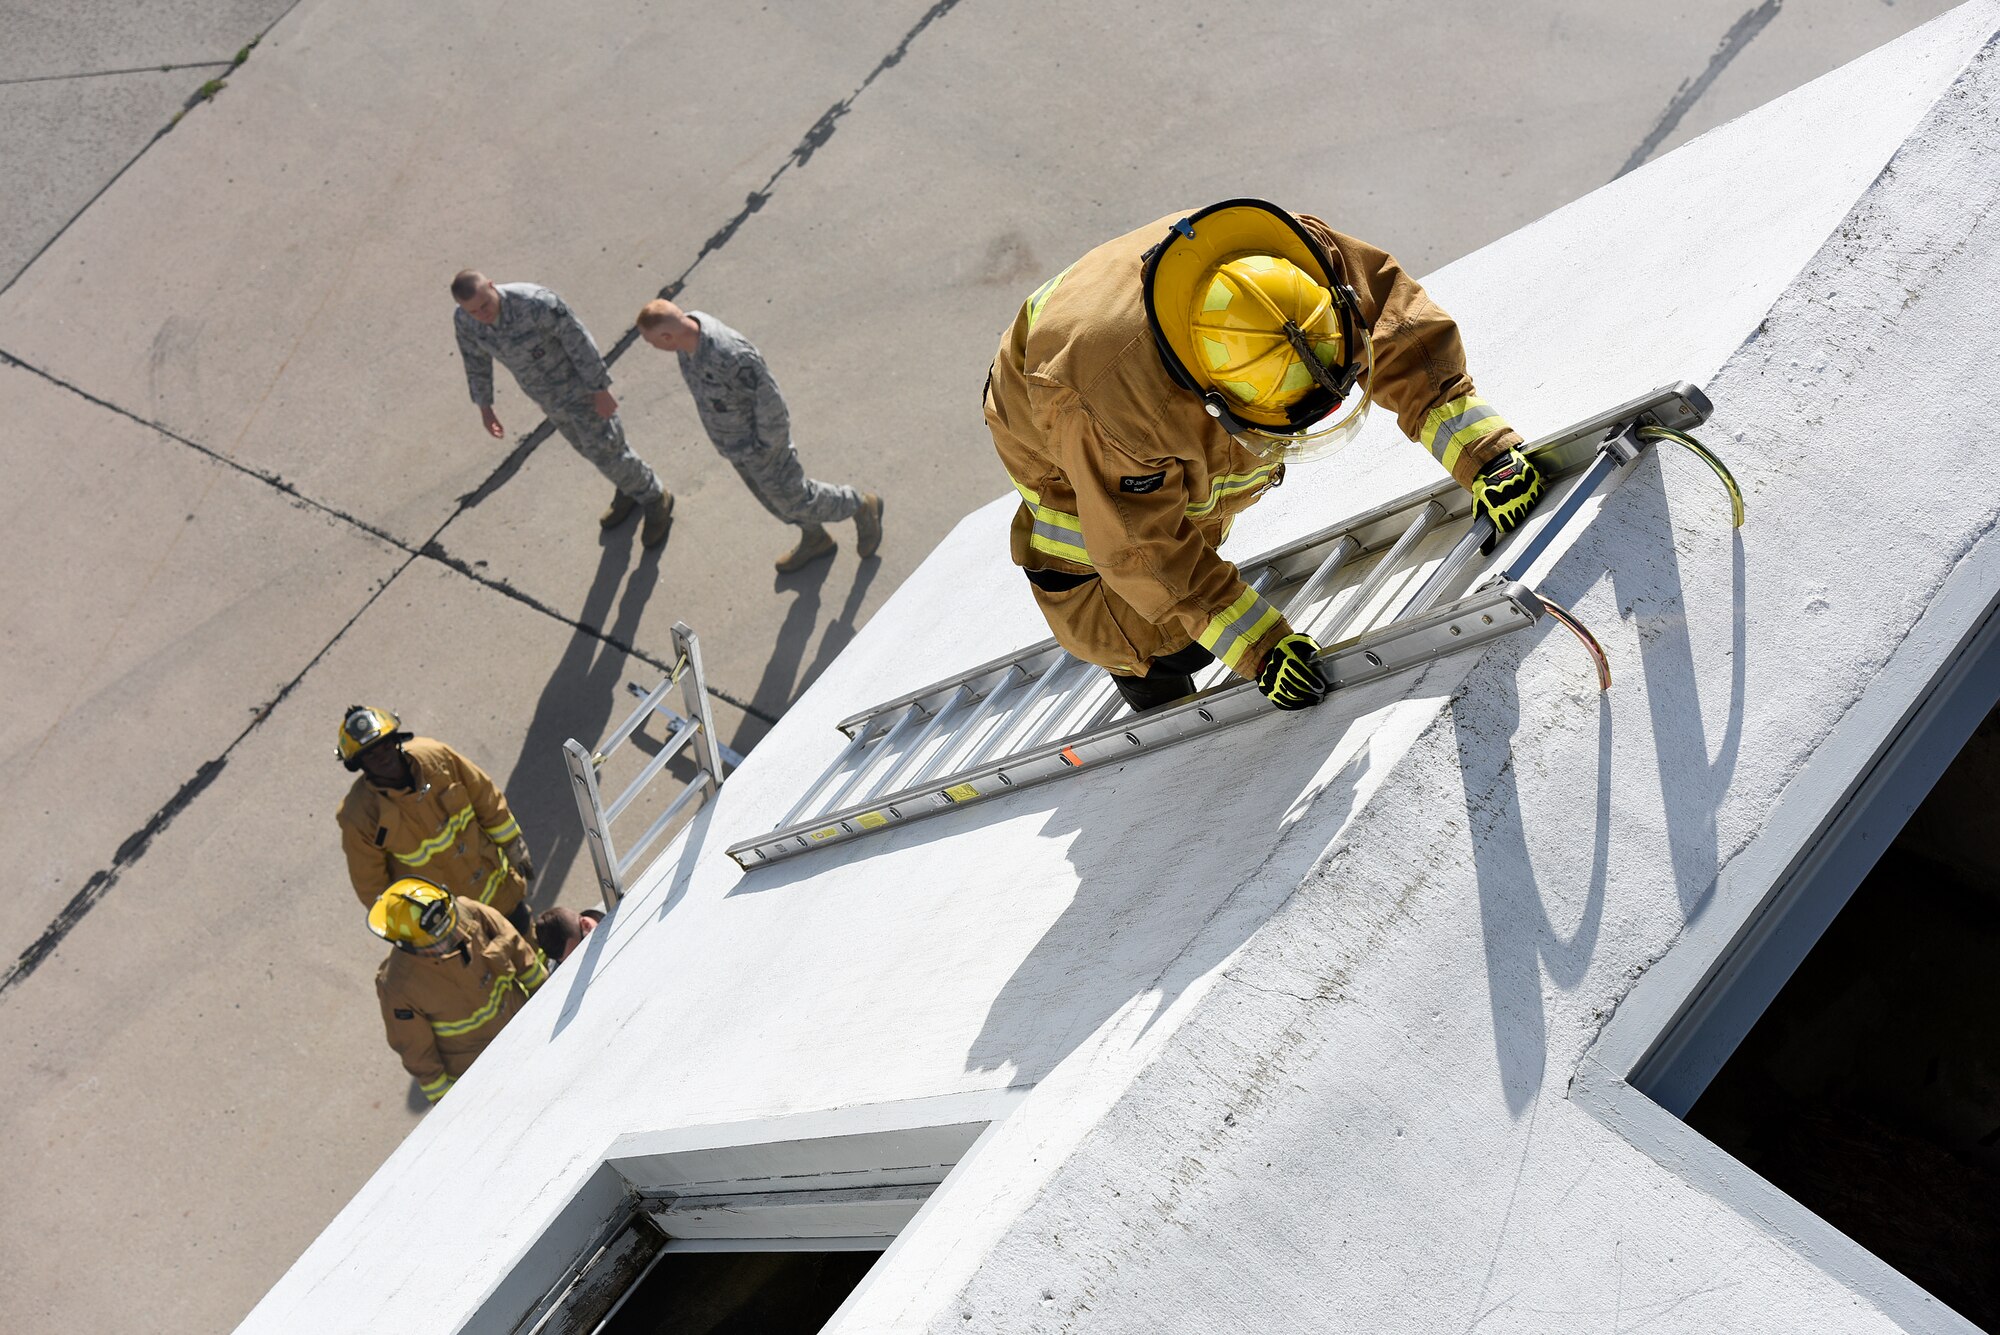 A U.S. Air National Guard firefighter assigned to the 180th Fighter Wing ascends a ladder during a Regularly Scheduled Drill training exercise Nov. 7, 2015 in Swanton, Ohio at a specialized training facility owned by the Toledo Fire Department. The 180th Fighter Wing partners with the Toledo Fire Department and other civil authorities to share resources and maximize training benefits. (U.S. Air National Guard photo by Staff Sgt. Shane Hughes/Released)